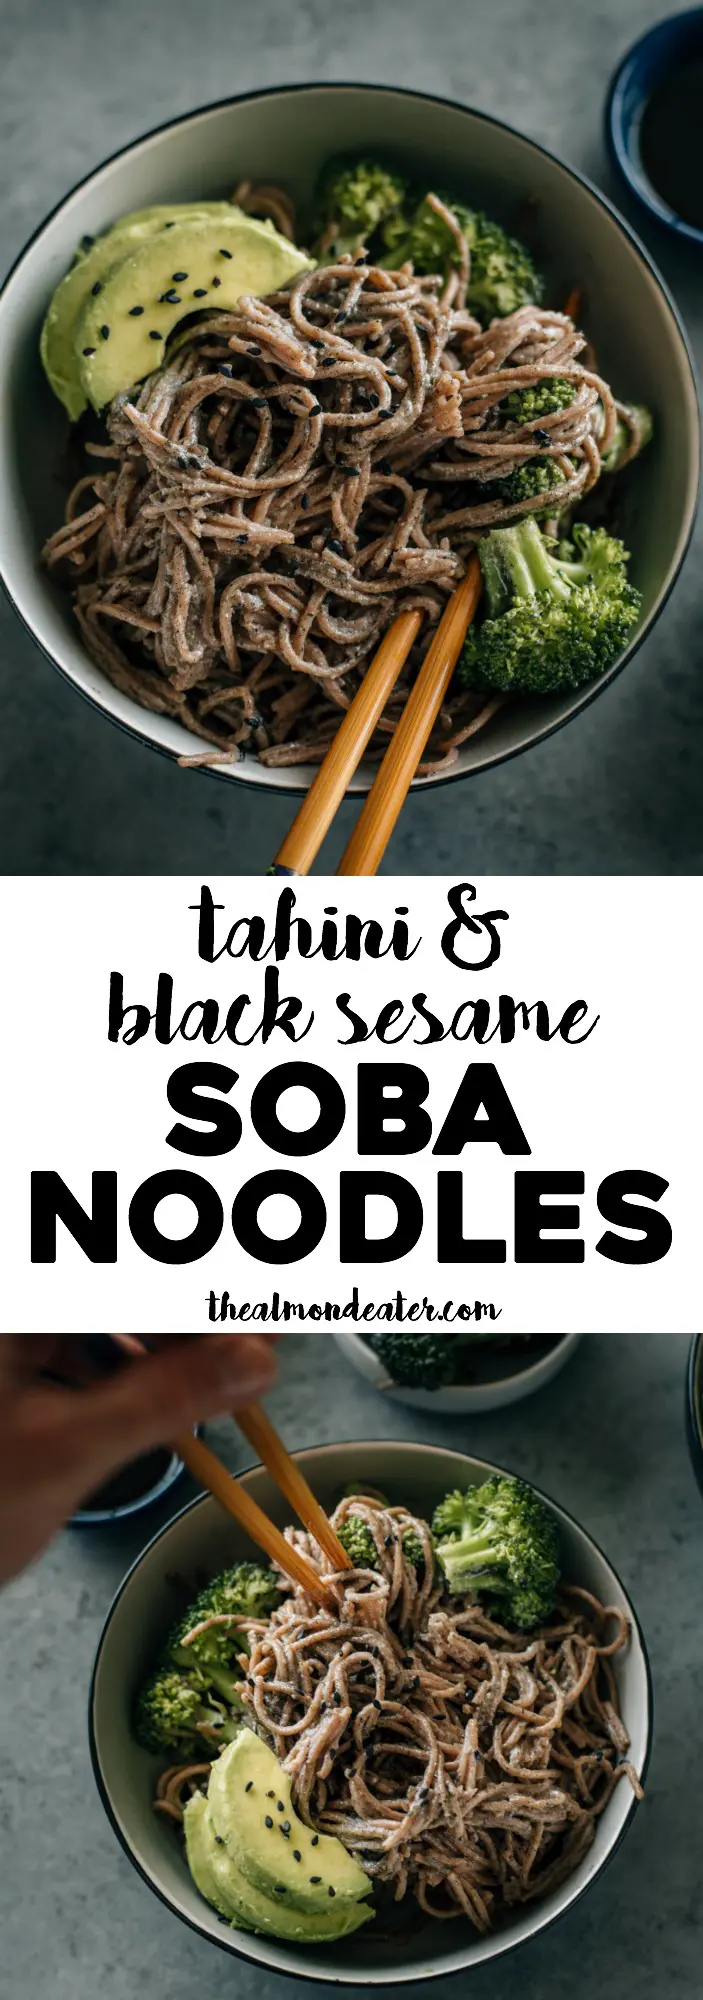 Black Sesame Soba Noodles | Soba noodles marinated in tahini and a black sesame sauce and topped with broccoli and avocado--a sweet and simple dish | thealmondeater.com